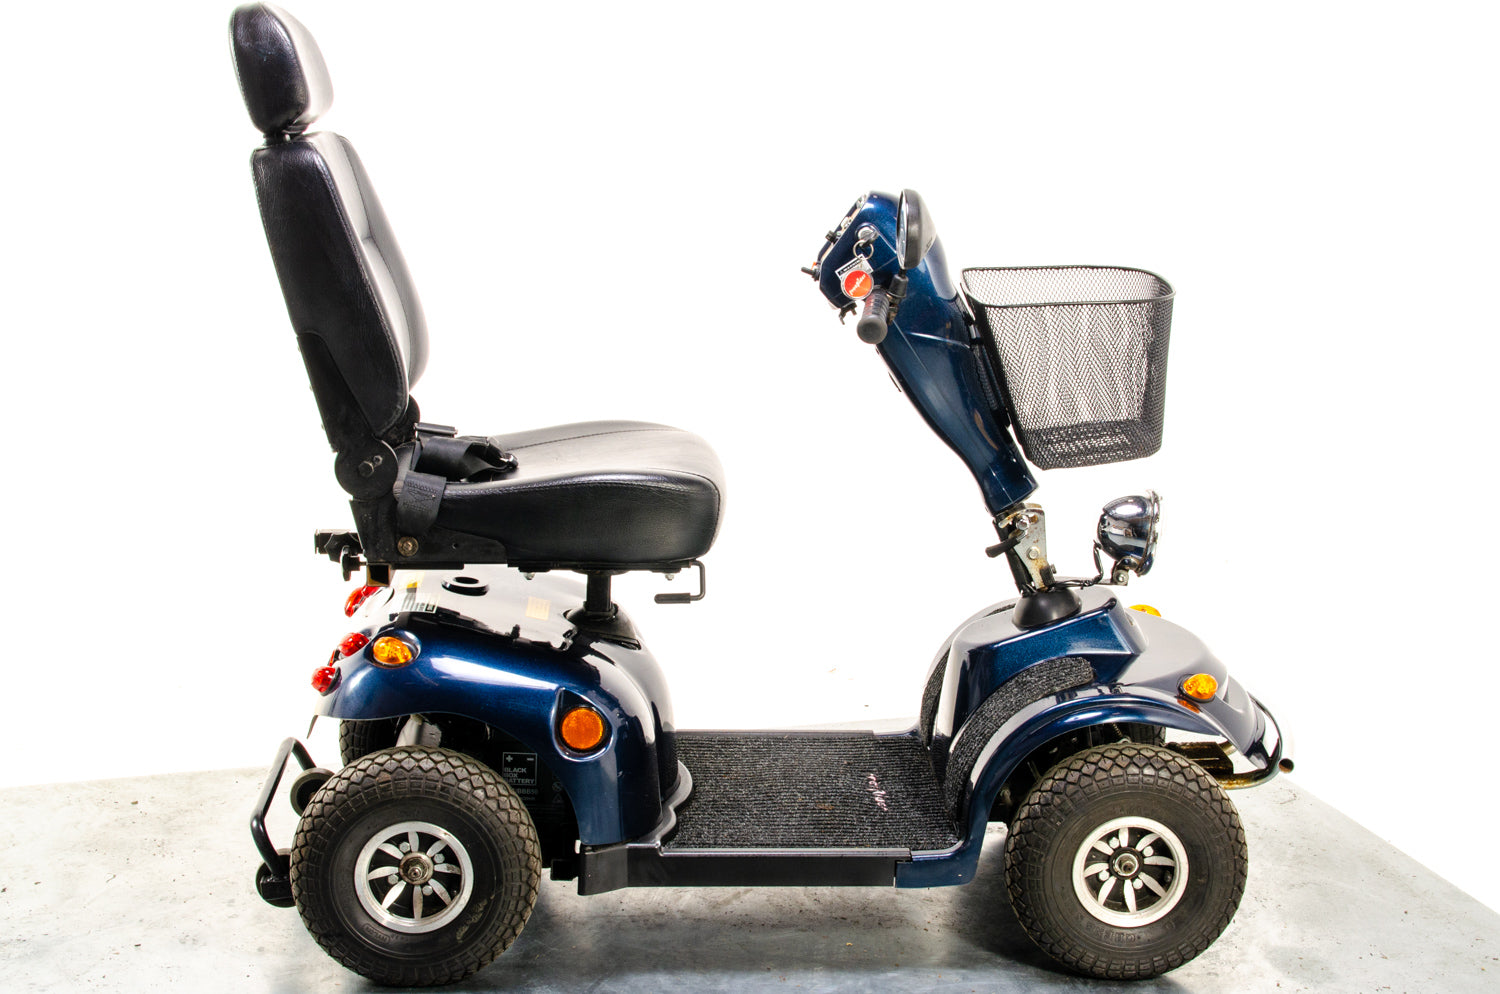 Freerider Kensington S Used Mobility Scooter Midsize All-Terrain Pavement Road Blue